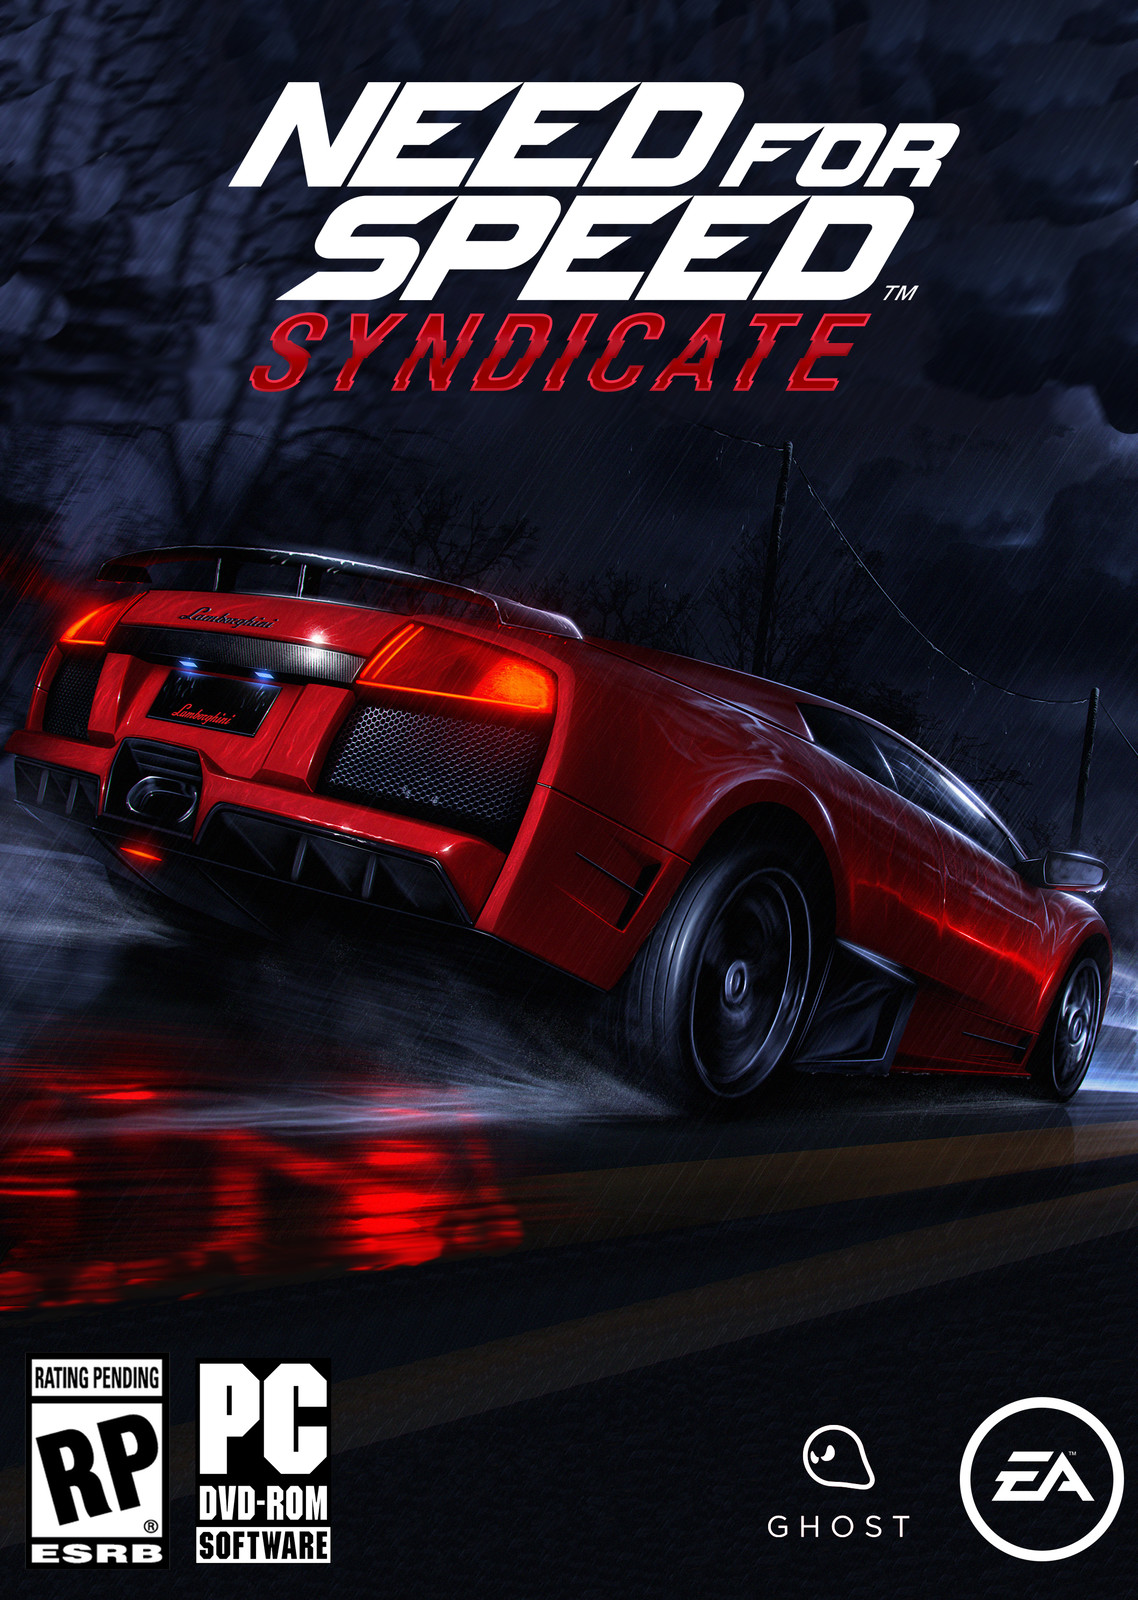 Need for Speed Syndicate (Original Idea)